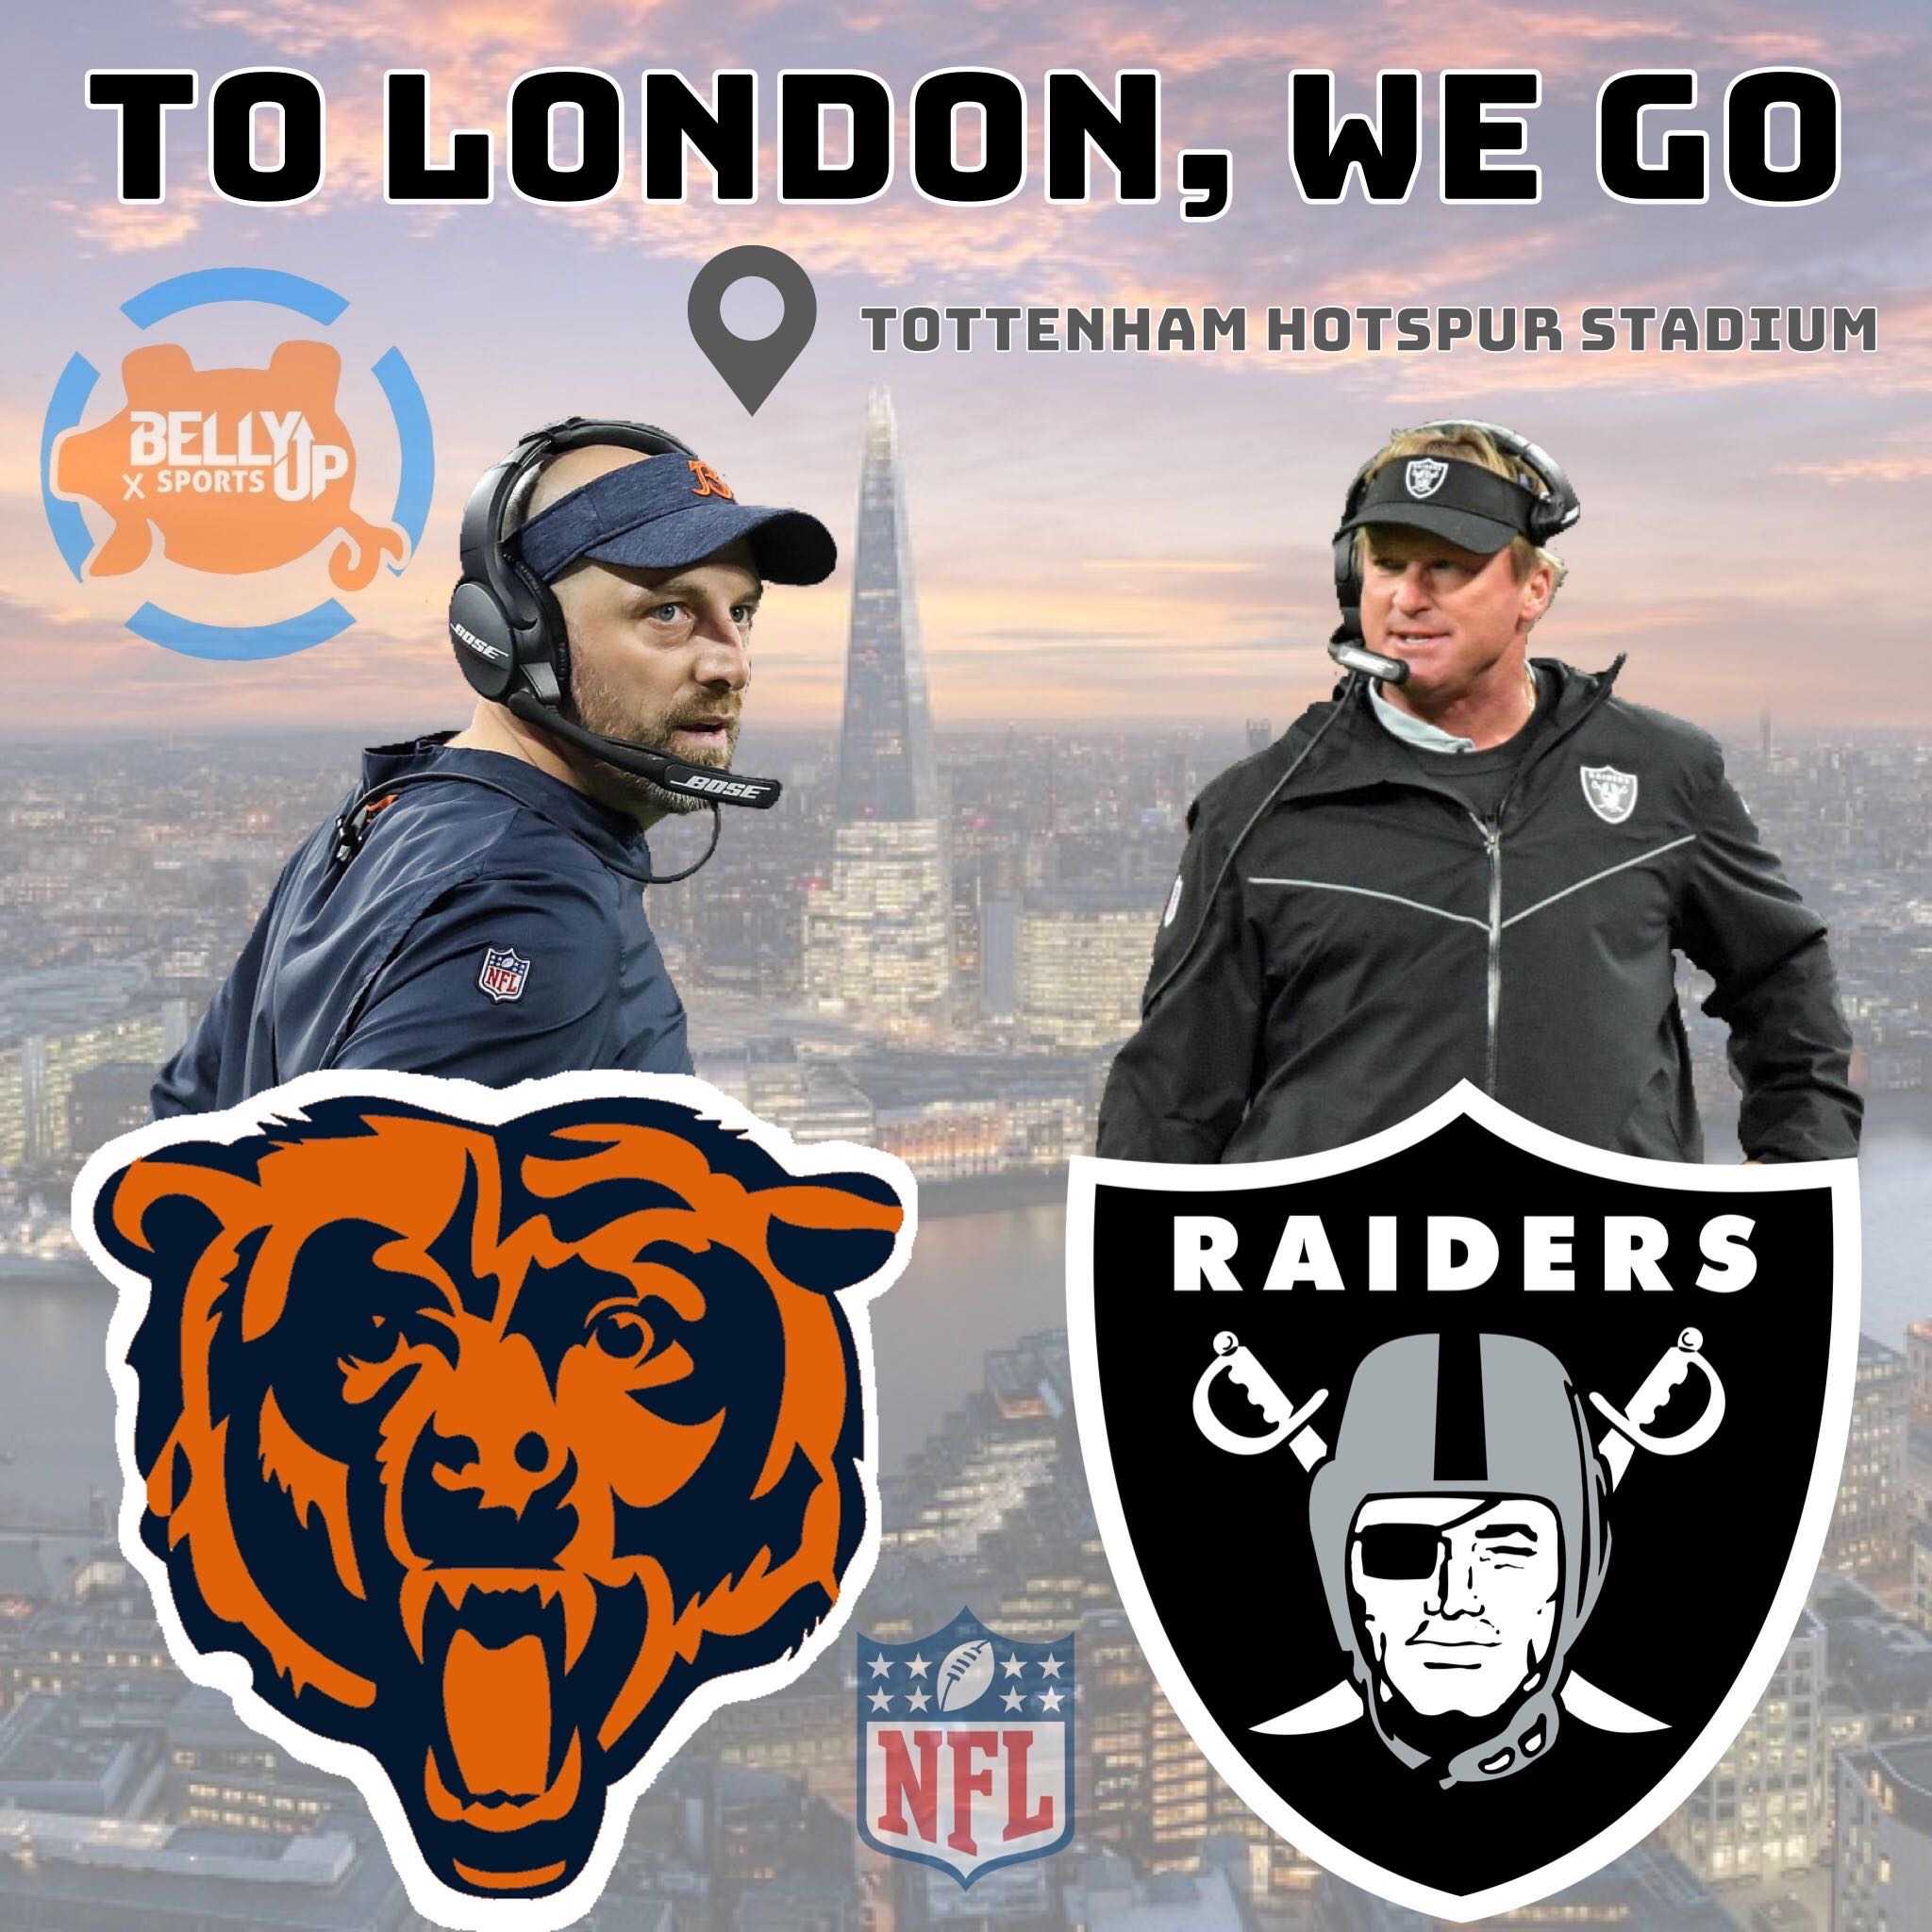  NFL Week 5 Preview: Chicago Bears vs. Oakland Raiders In London